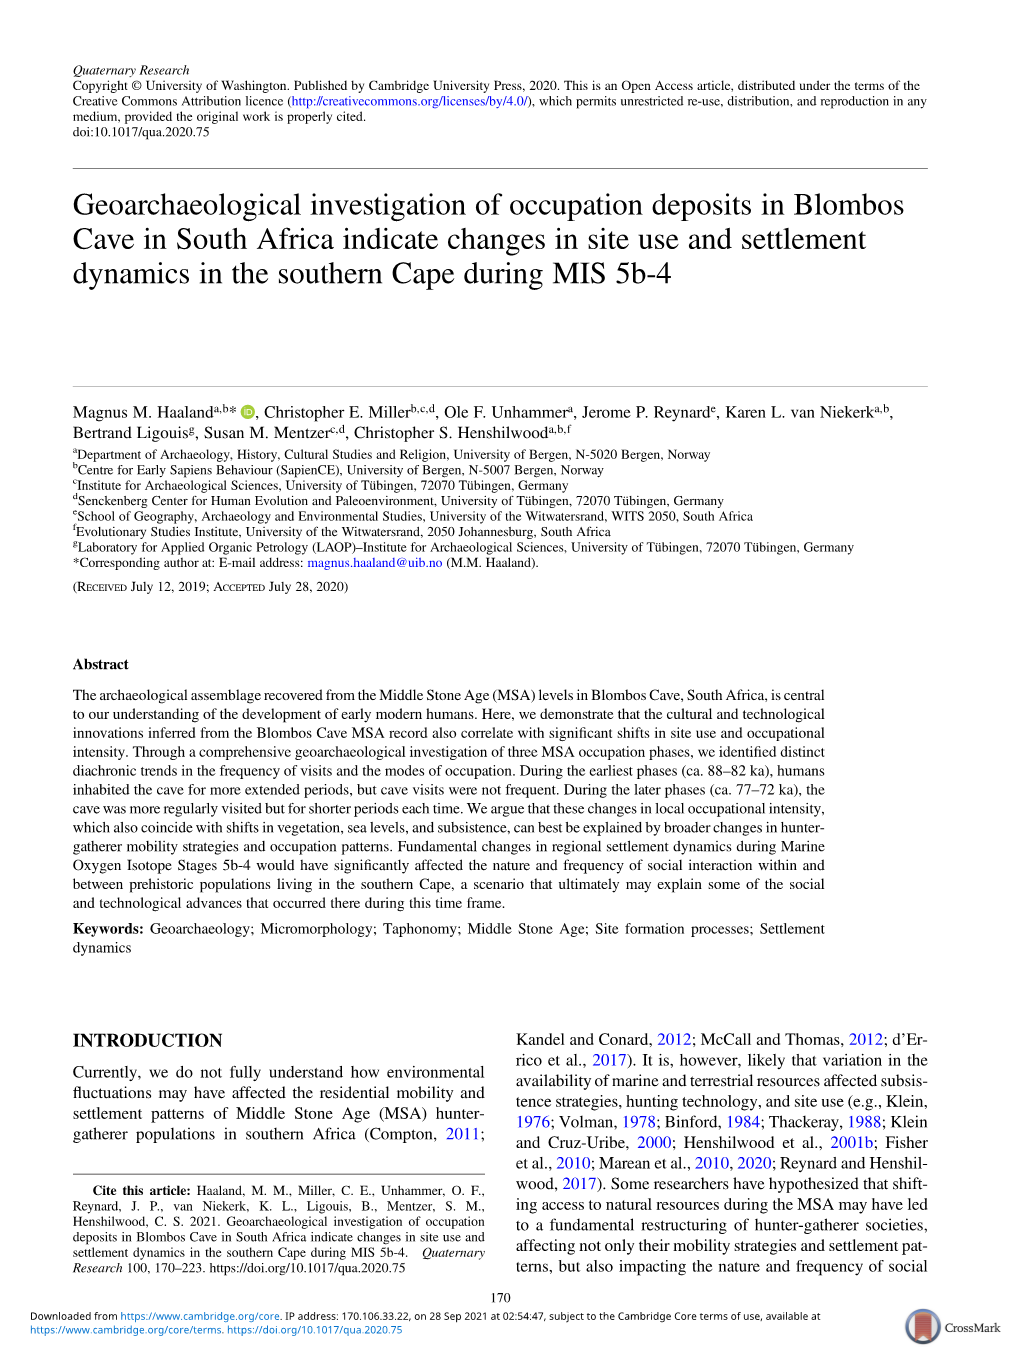 Geoarchaeological Investigation of Occupation Deposits in Blombos